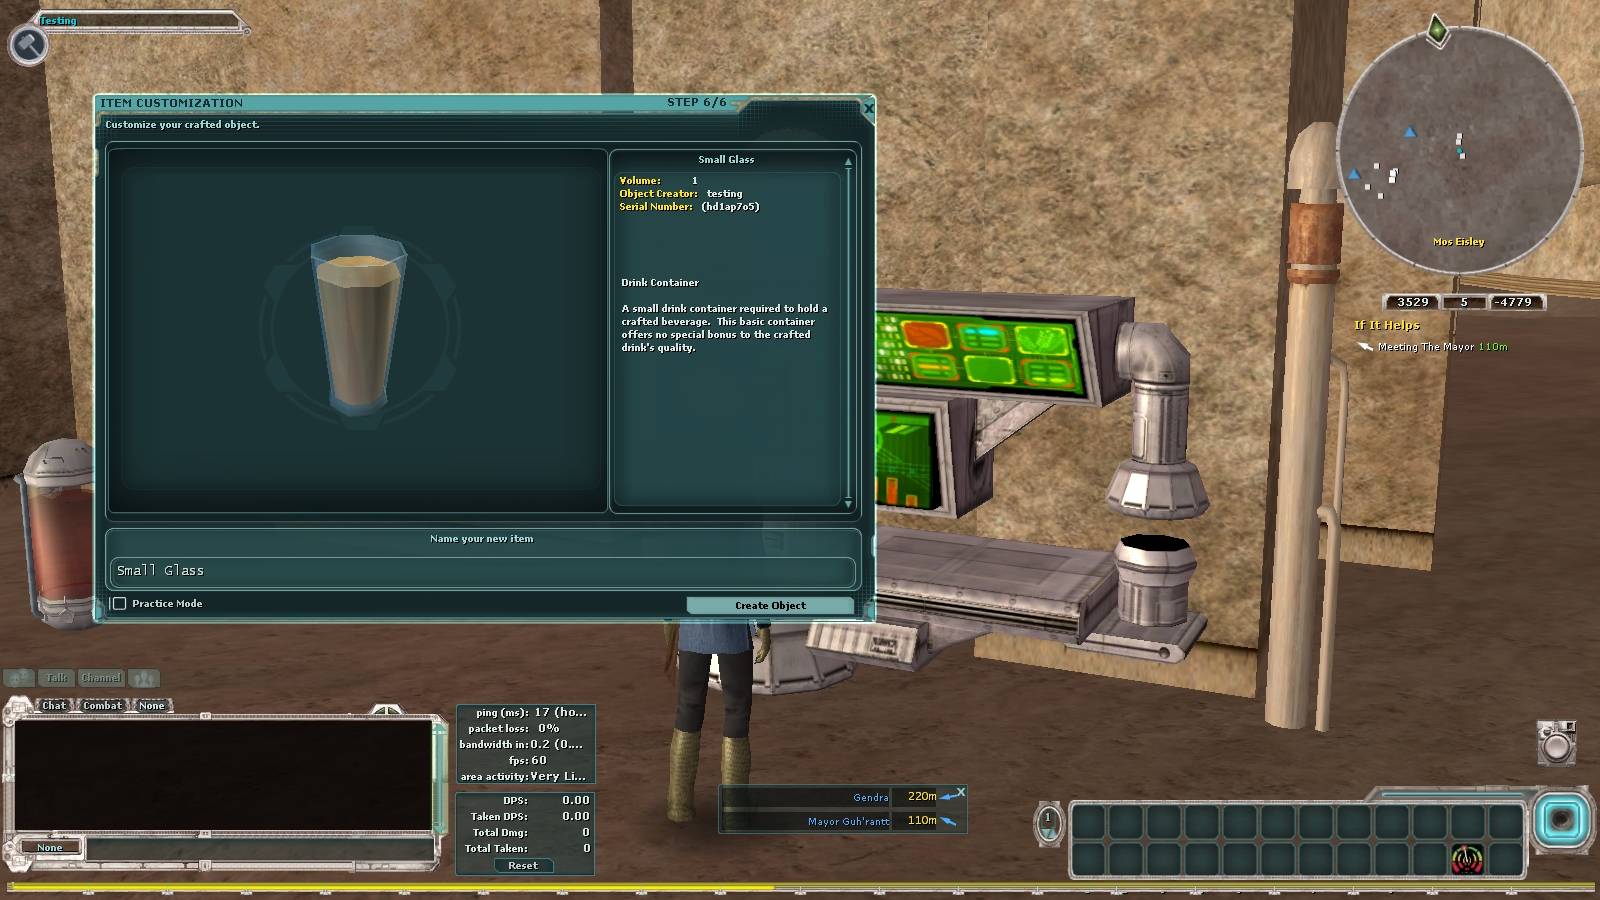 j2SiHdv - [Release] Star Wars Galaxies Official Source Code (Client/Server) - RaGEZONE Forums